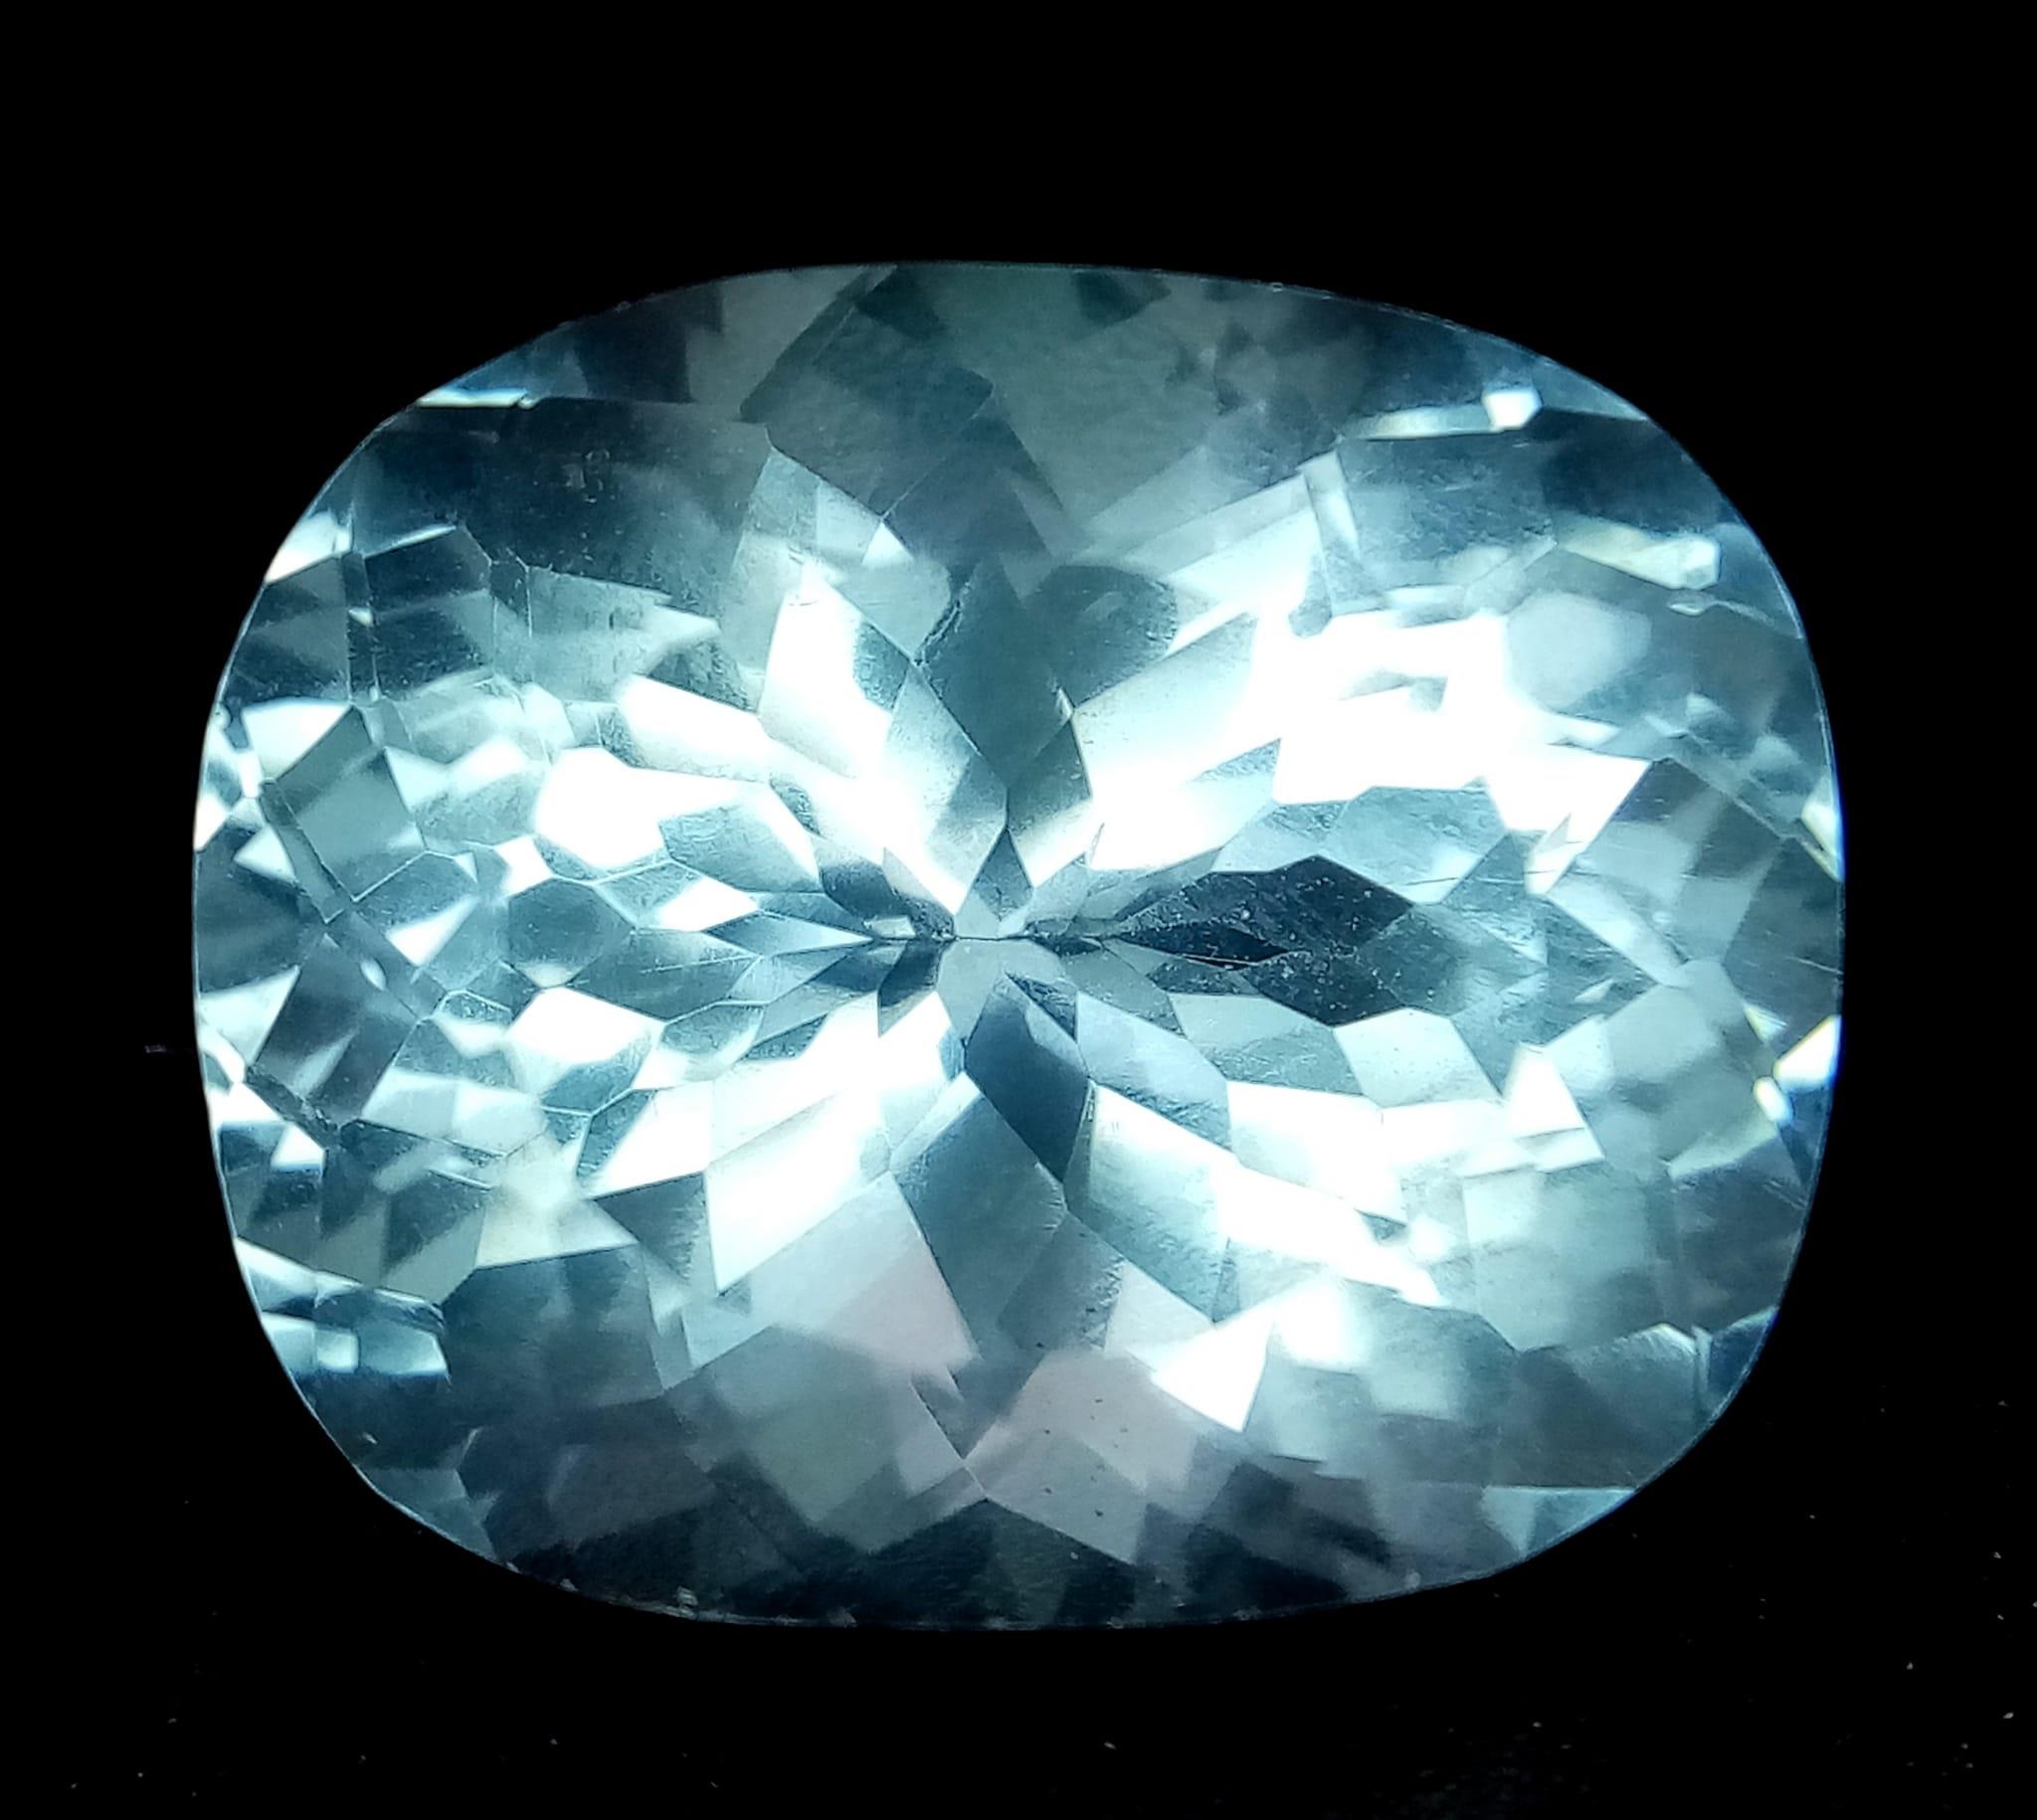 A 20ct Mesmerizing Blue Aquamarine Gemstone. Square -cut with a trillion base. This faceted gem